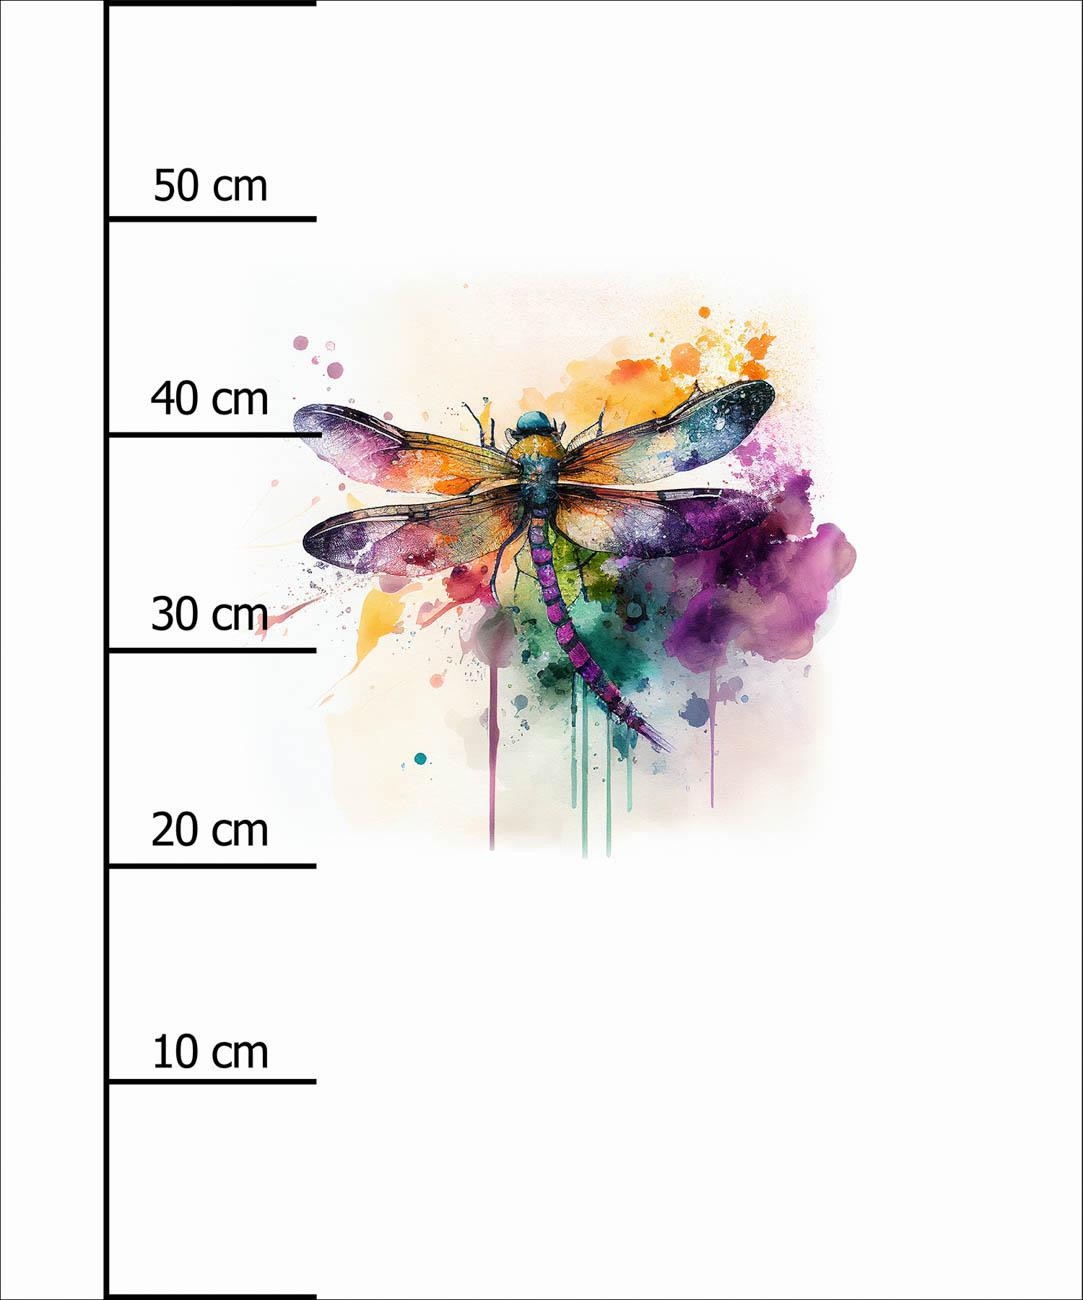 WATERCOLOR DRAGONFLY - PANEL (60cm x 50cm) - Thermo lycra